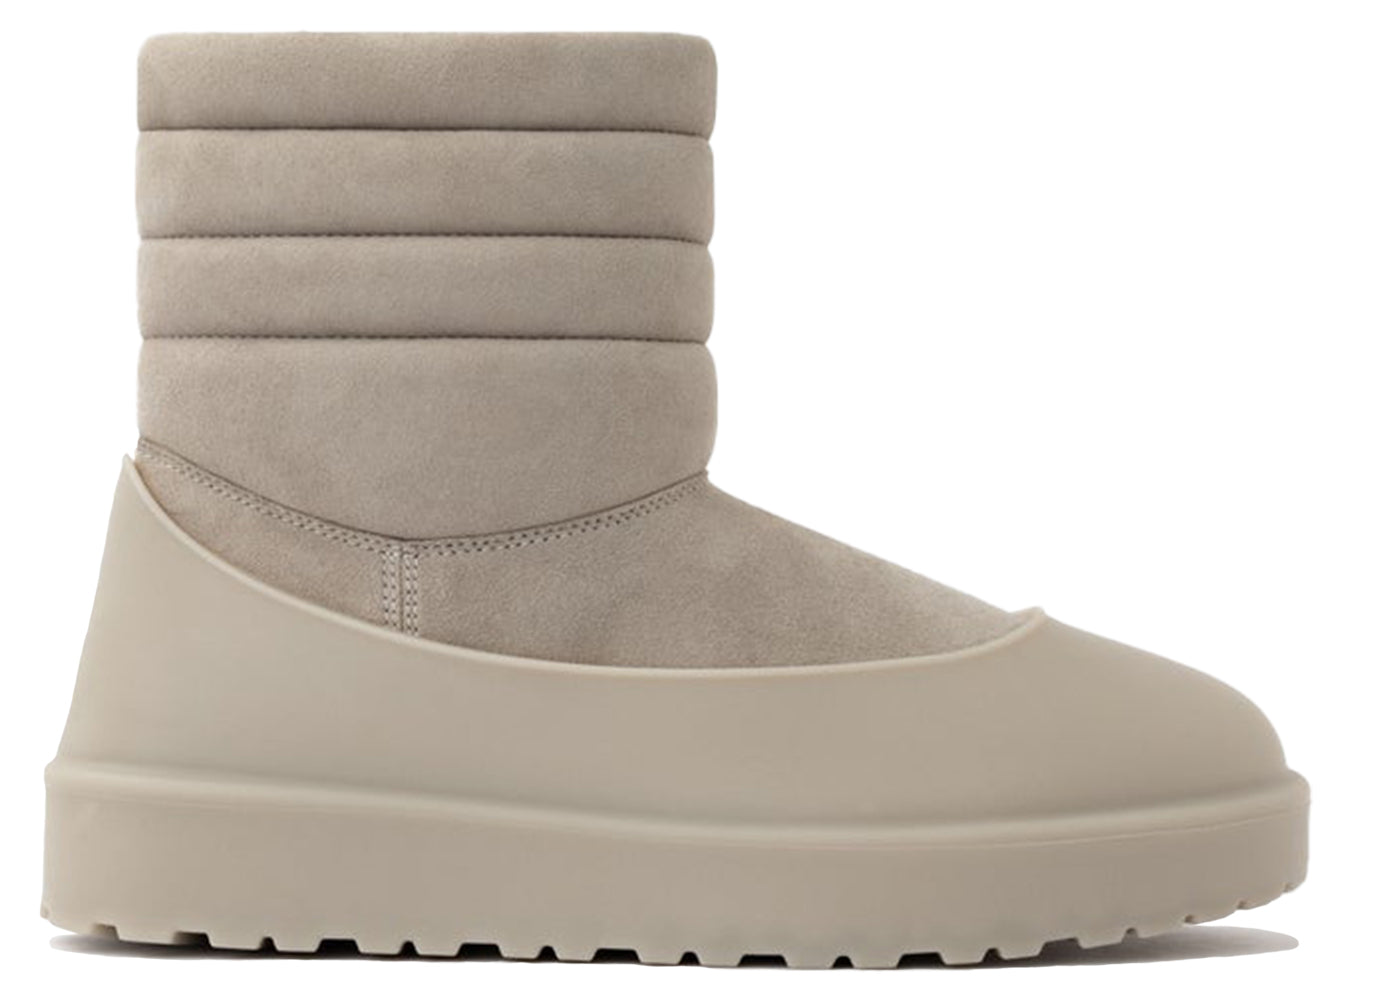 UGG CLASSIC BOOT STAMPD TAUPE